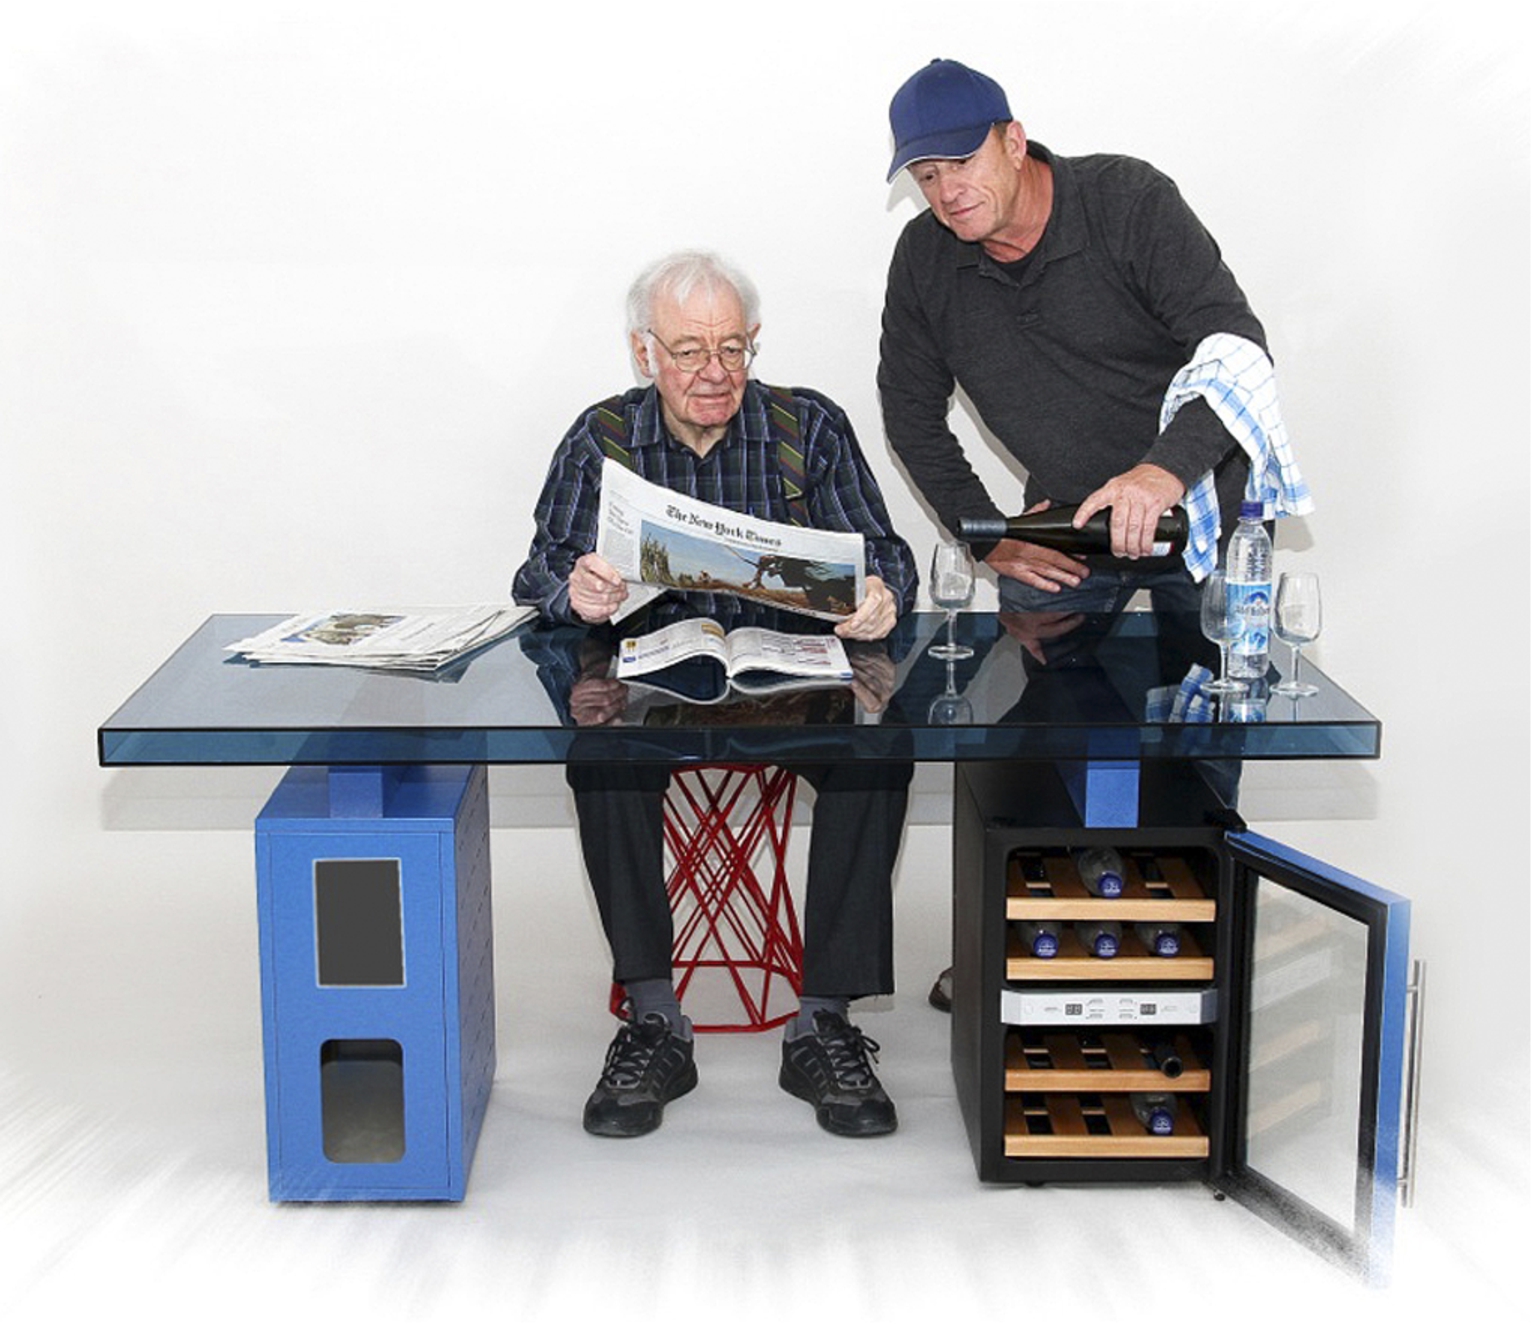 Erich Steichele: Technology transfer from neutron guides to living room tables (2006?).